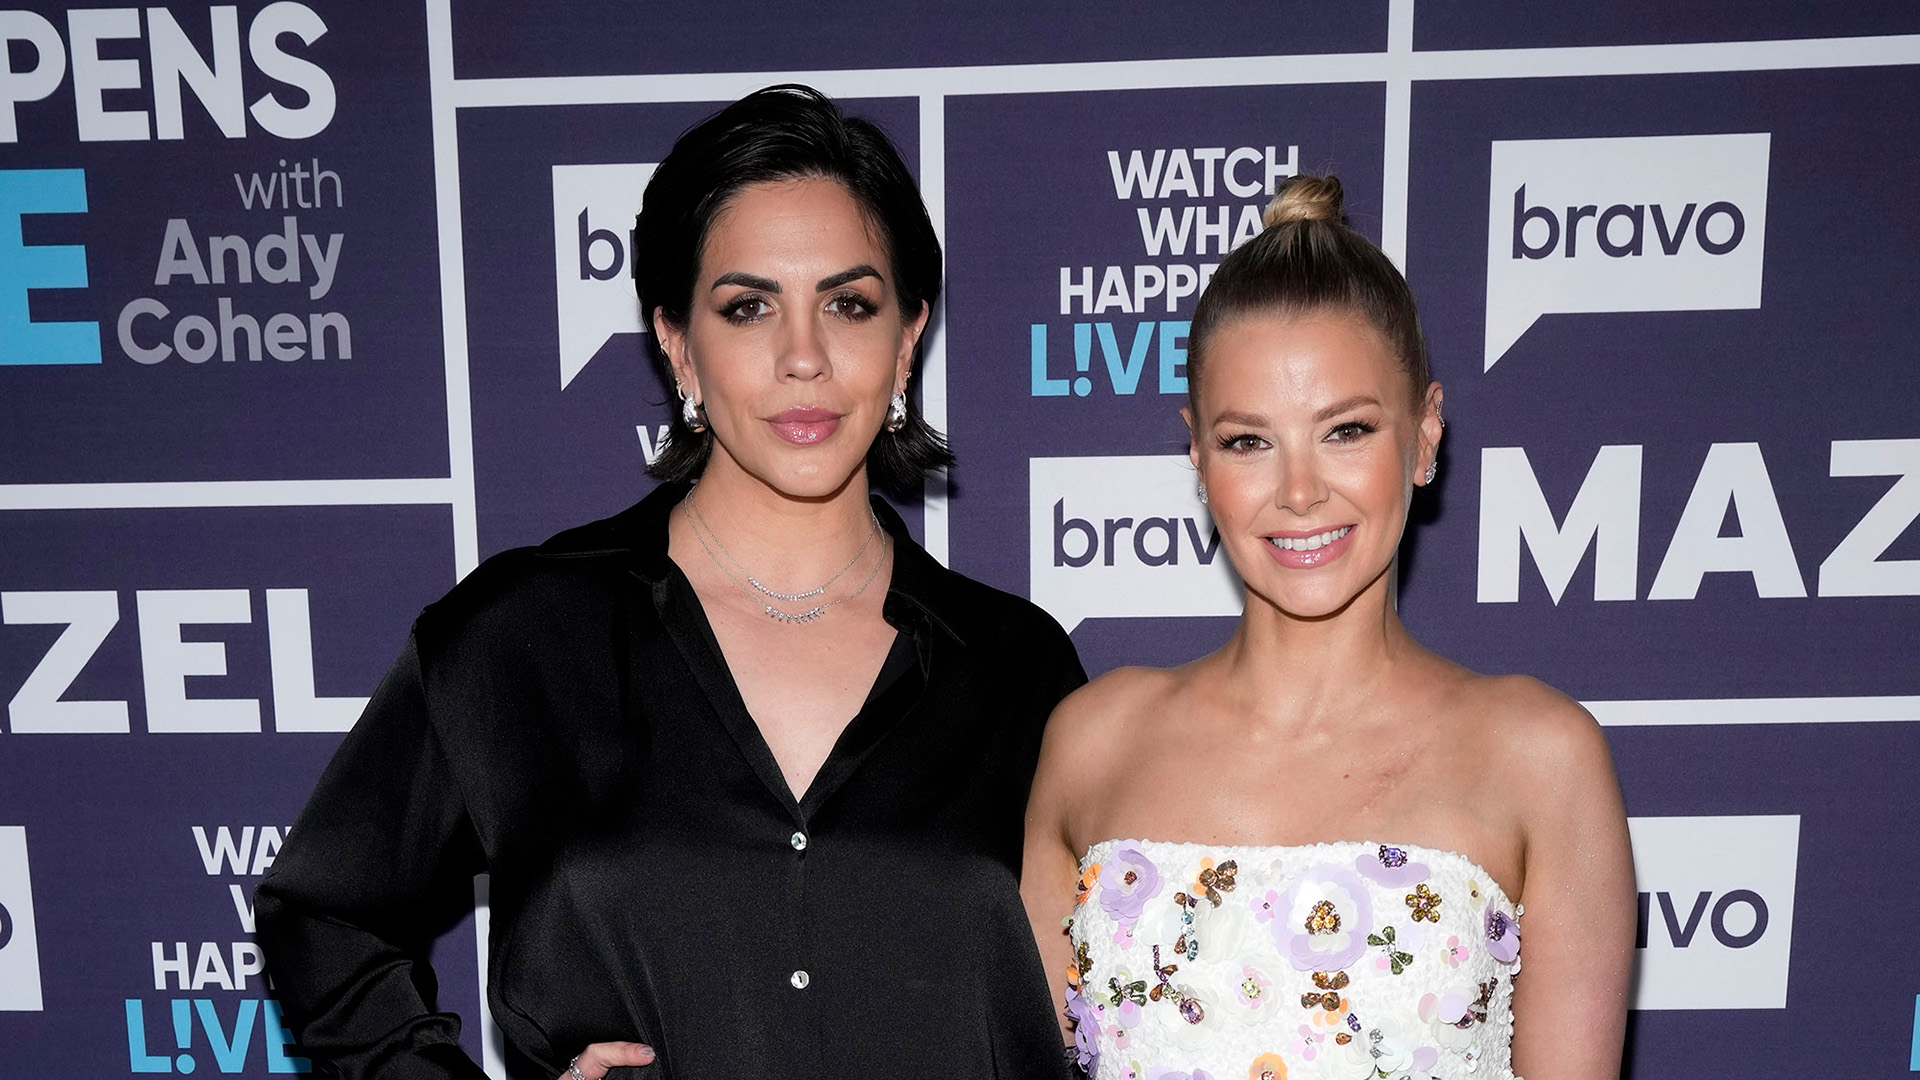 WATCH WHAT HAPPENS LIVE WITH ANDY COHEN -- Episode 21076 -- Pictured: (l-r) Ariana Madix, Katie Maloney -- (Photo by: Charles Sykes/Bravo via Getty Images)